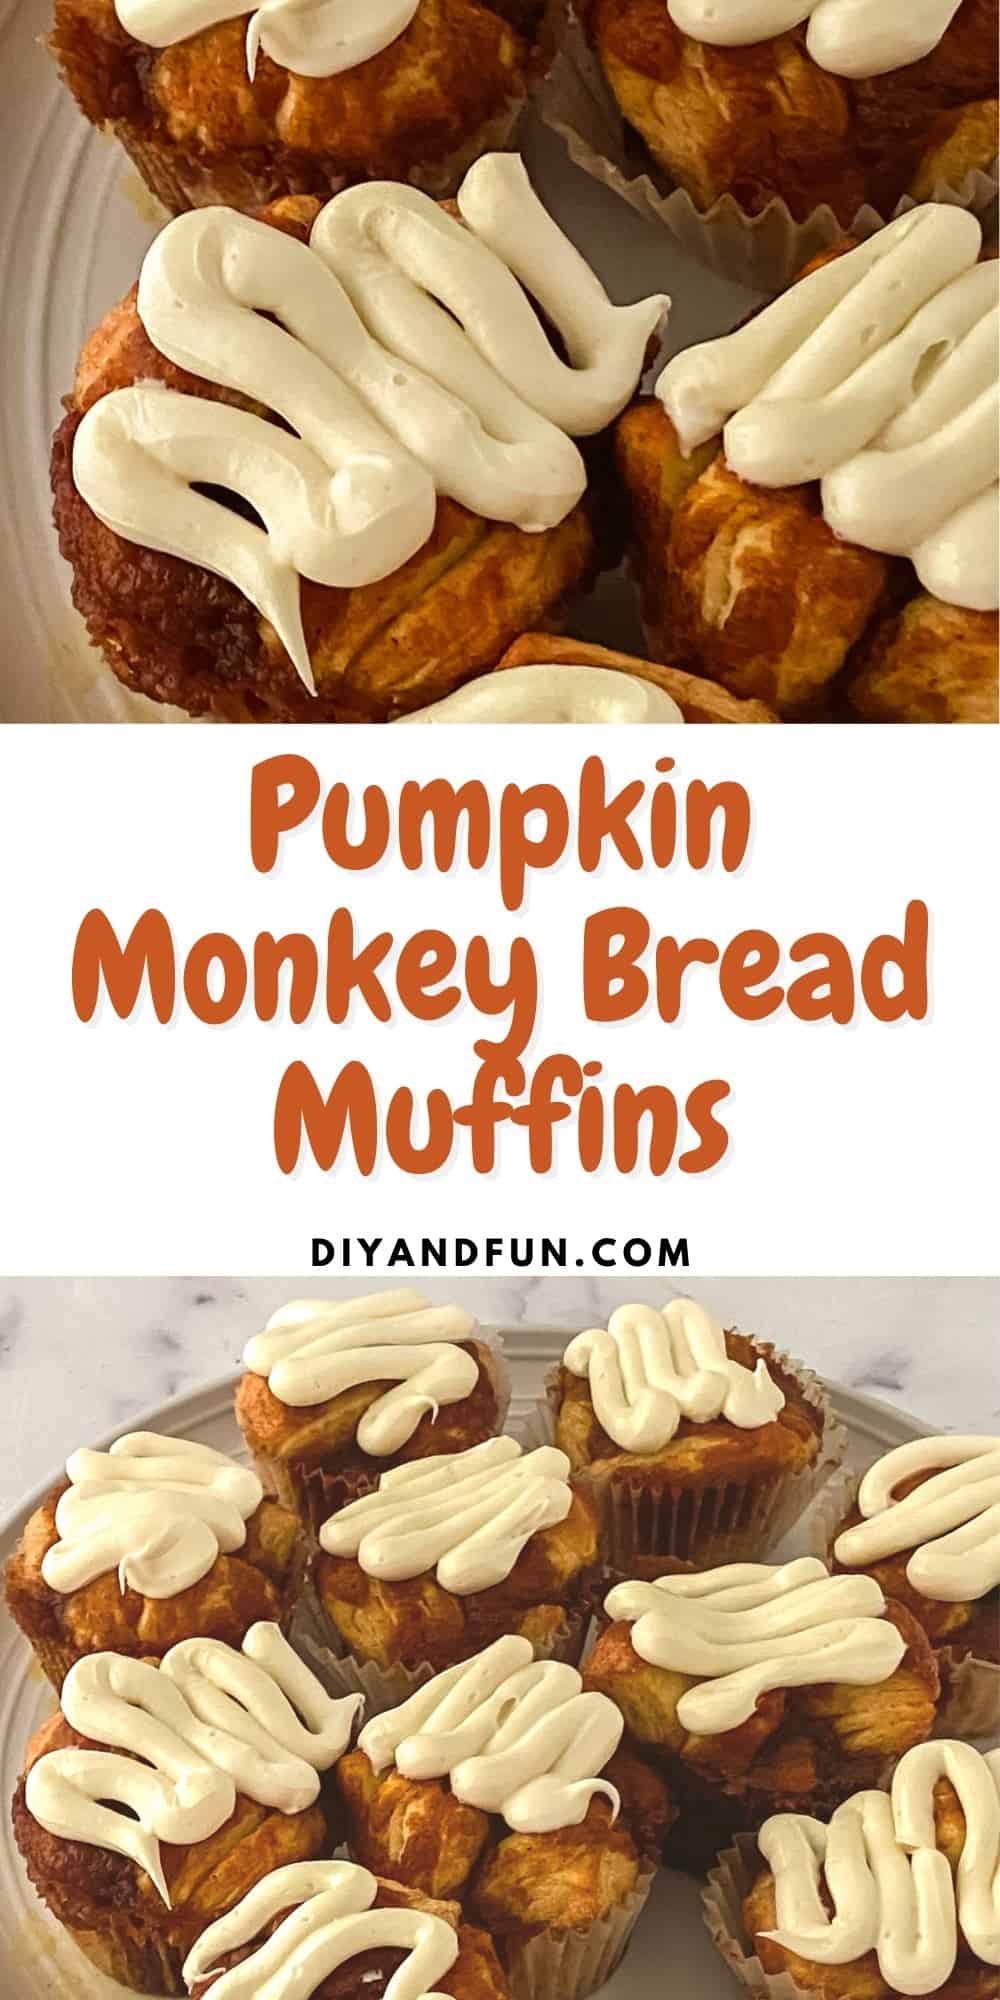 Easy Pumpkin Monkey Bread Muffins, a simple and delicious baked and frosted recipe using flaky biscuit dough.